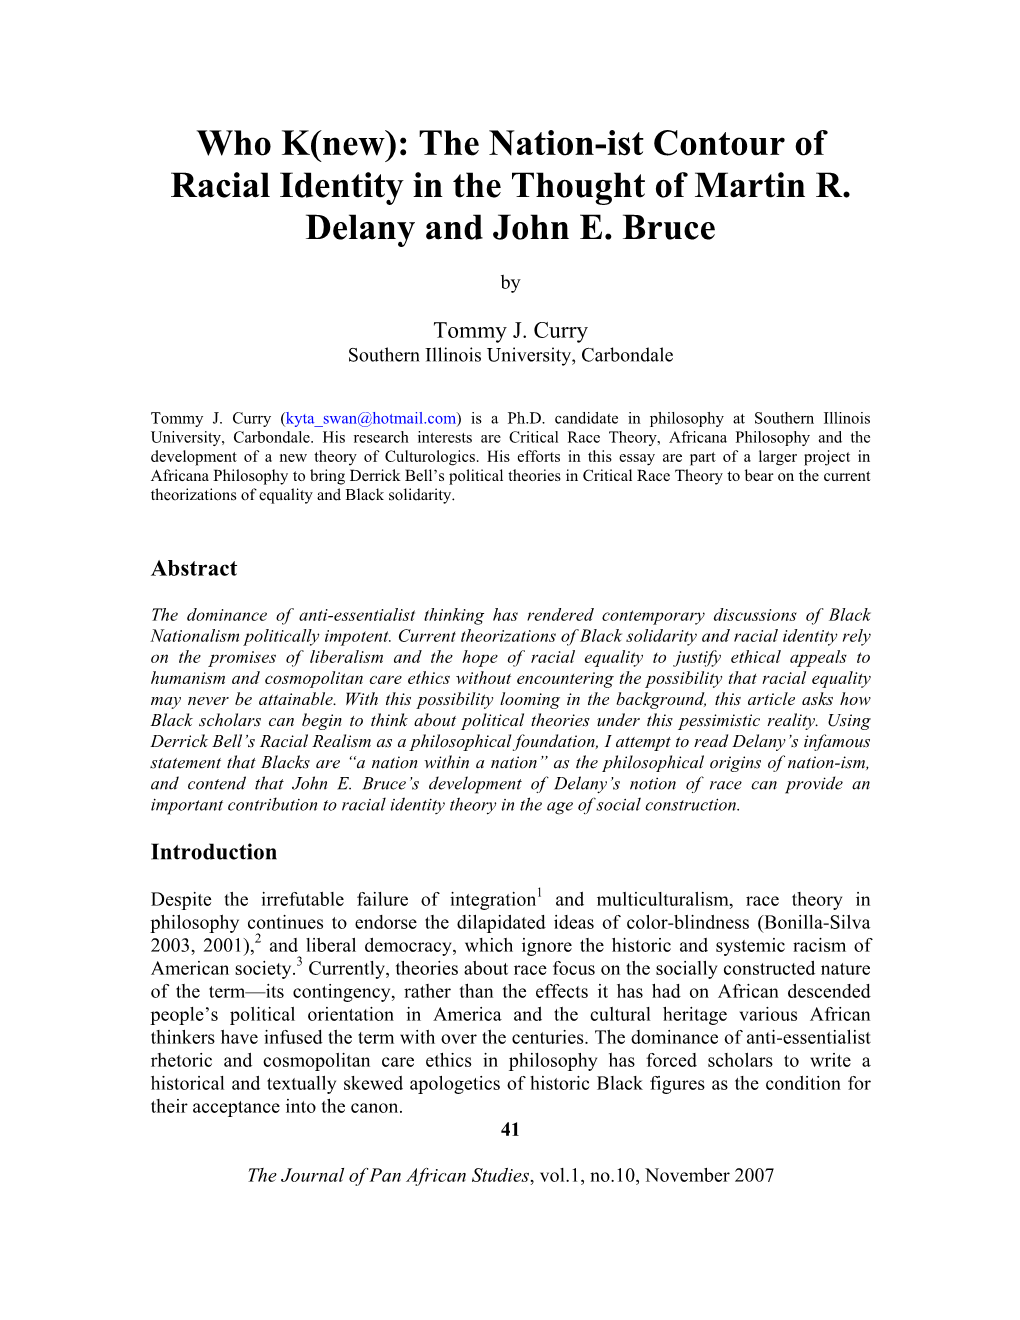 Who K(New): the Nation-Ist Contour of Racial Identity in the Thought of Martin R